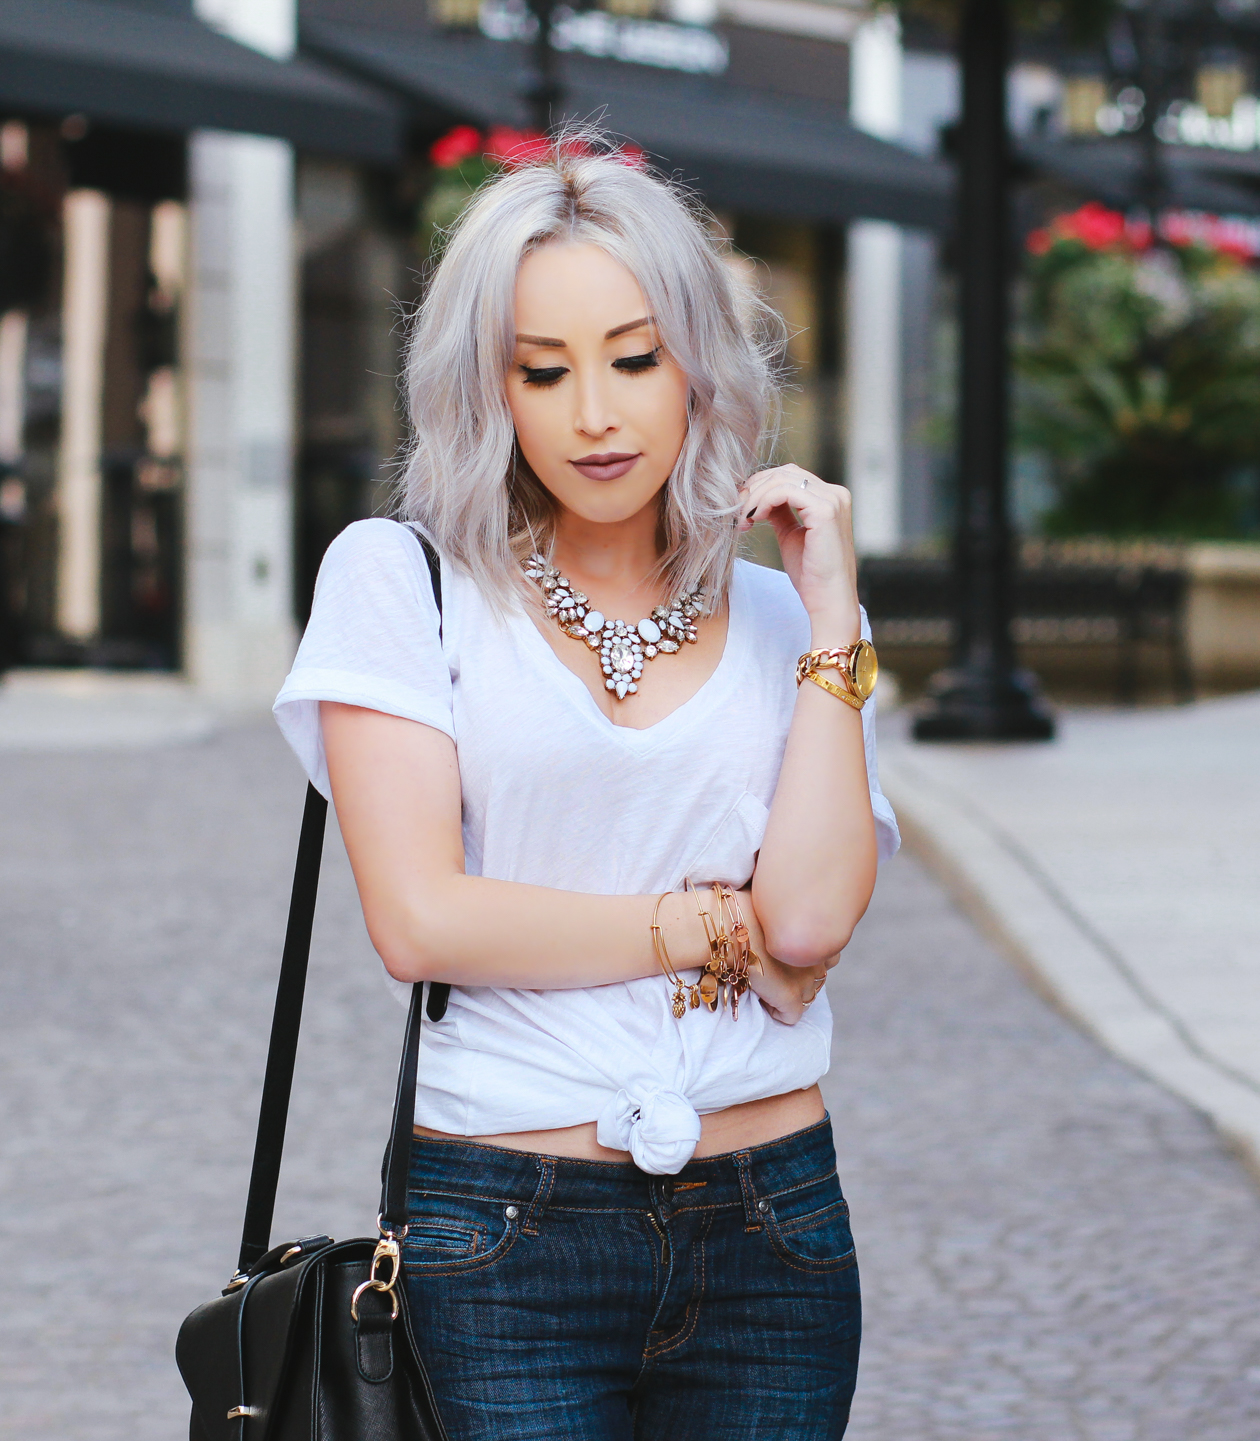 Jeans & a simple white tee on Rodeo Drive | BlondieintheCity.com